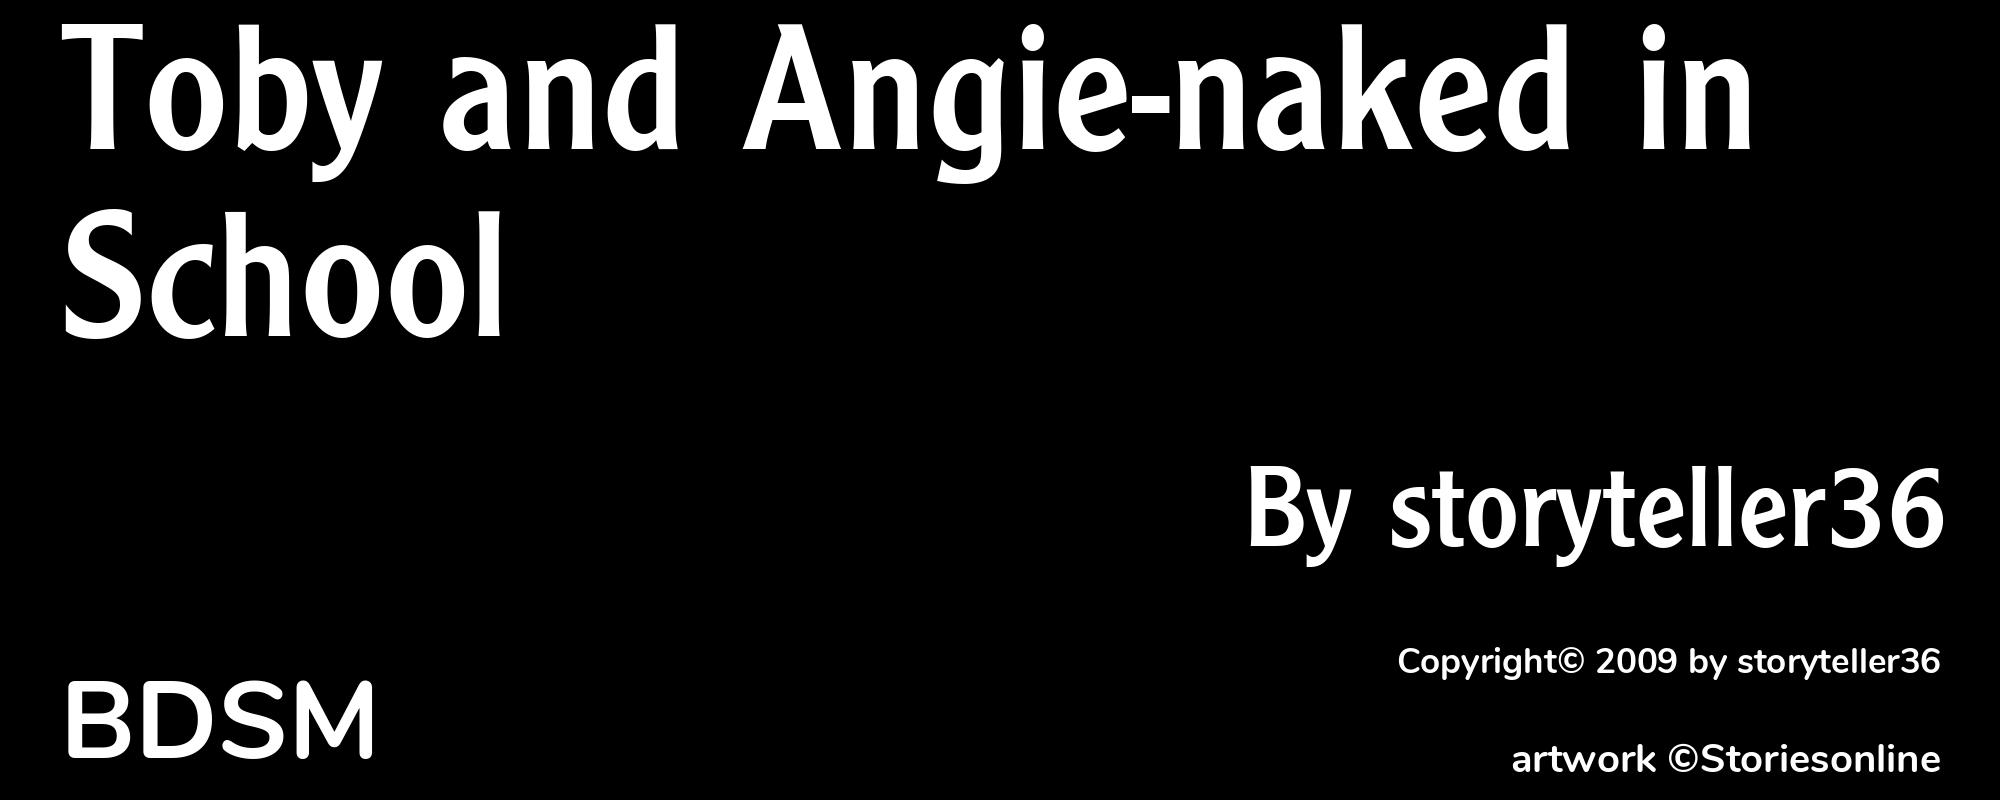 Toby and Angie-naked in School - Cover